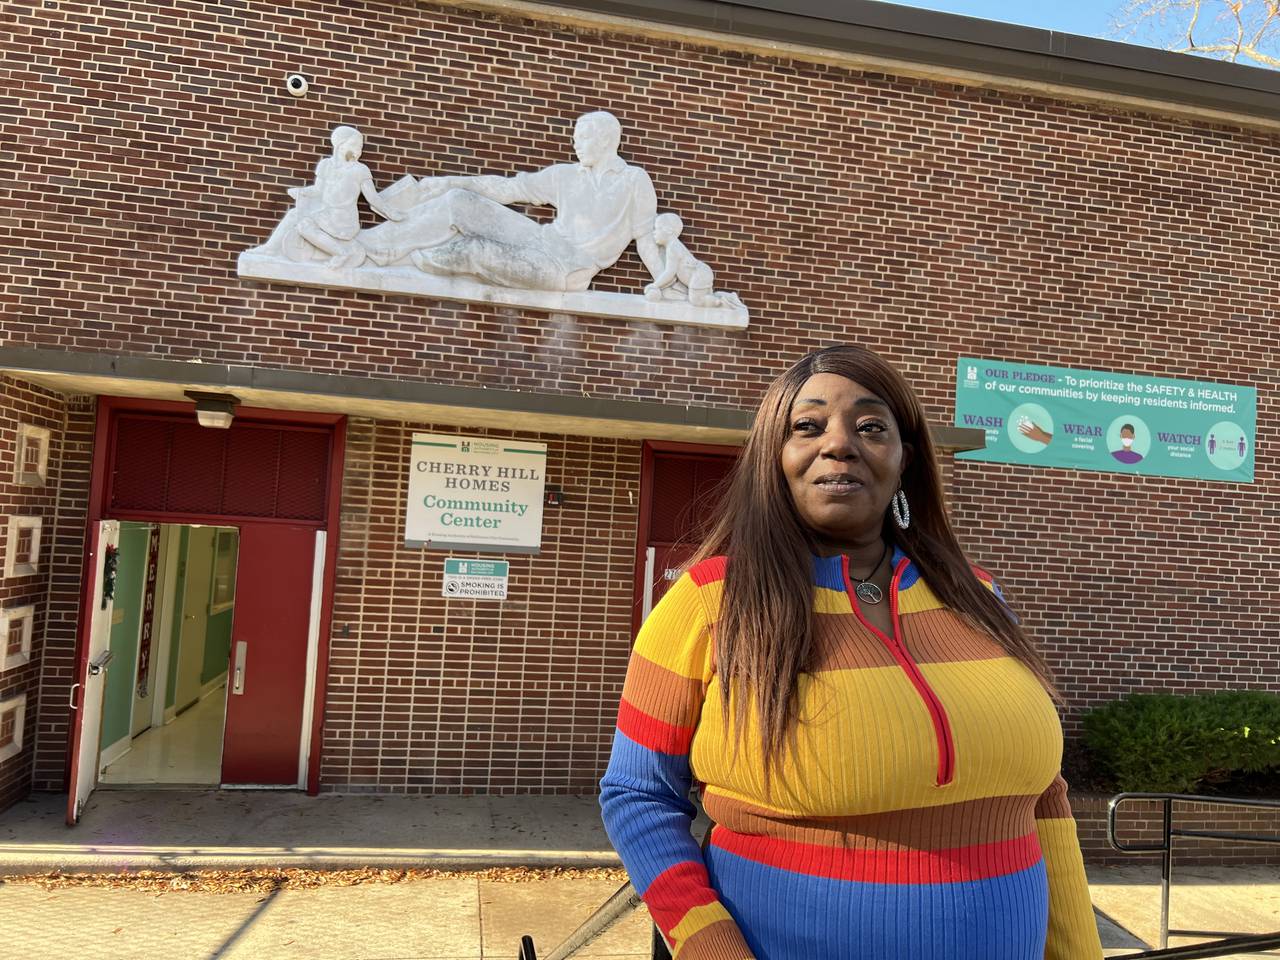 A woman in a striped dress stands in front of a community center.